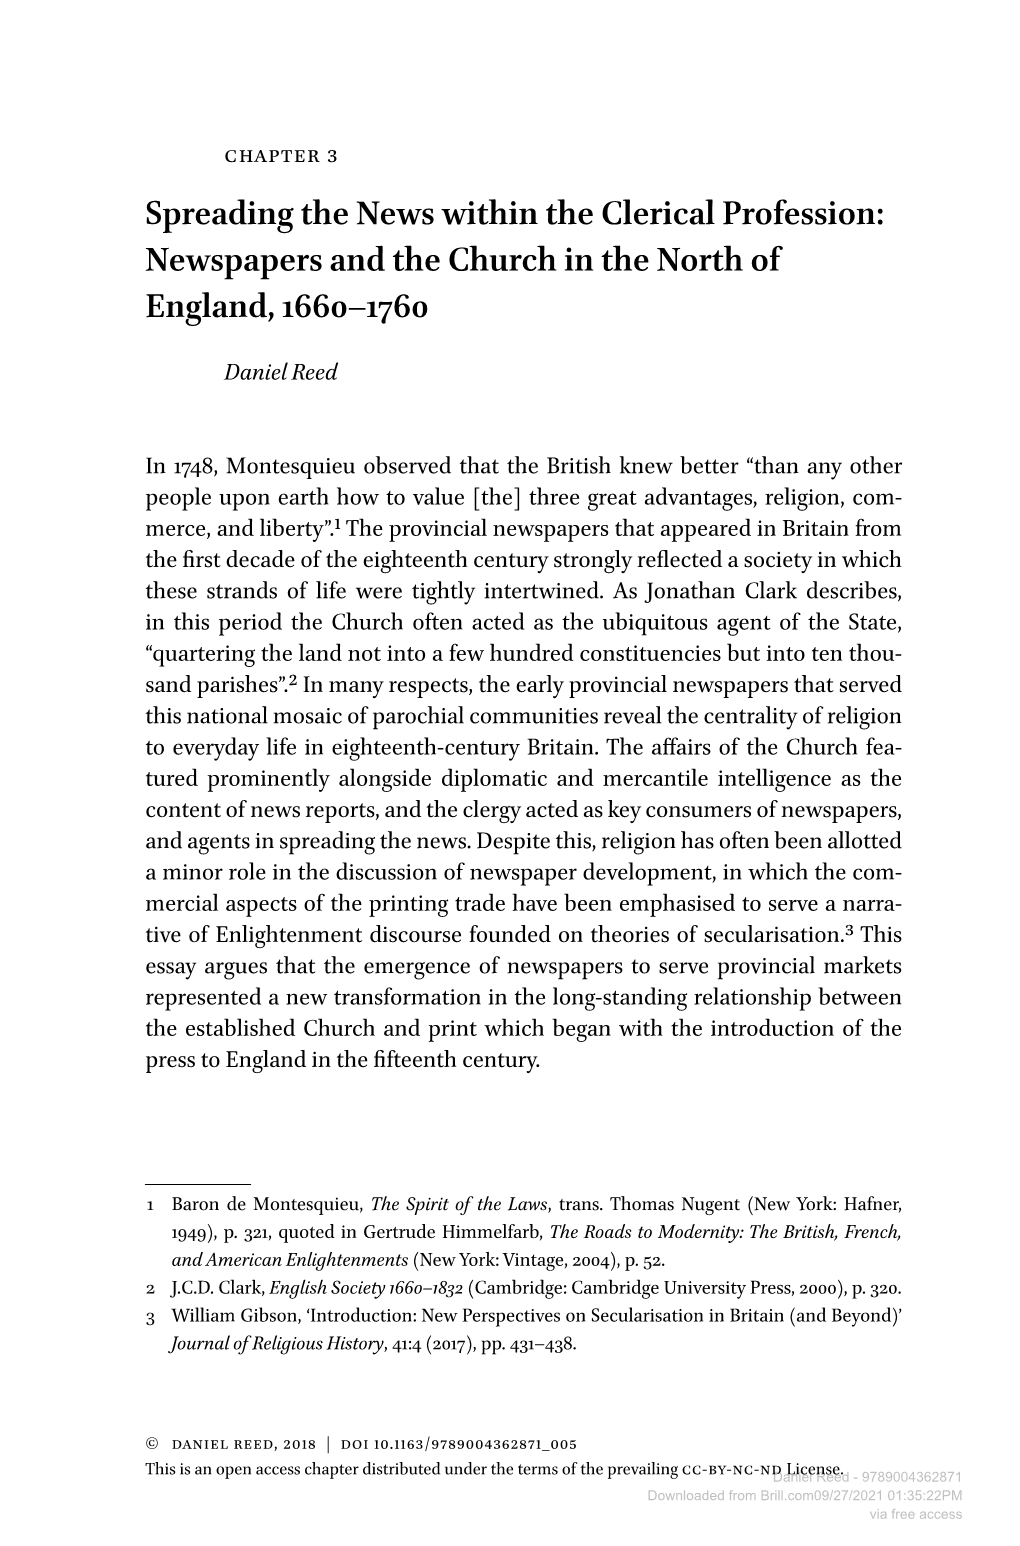 Spreading the News Within the Clerical Profession: Newspapers and the Church in the North of England, 1660–1760